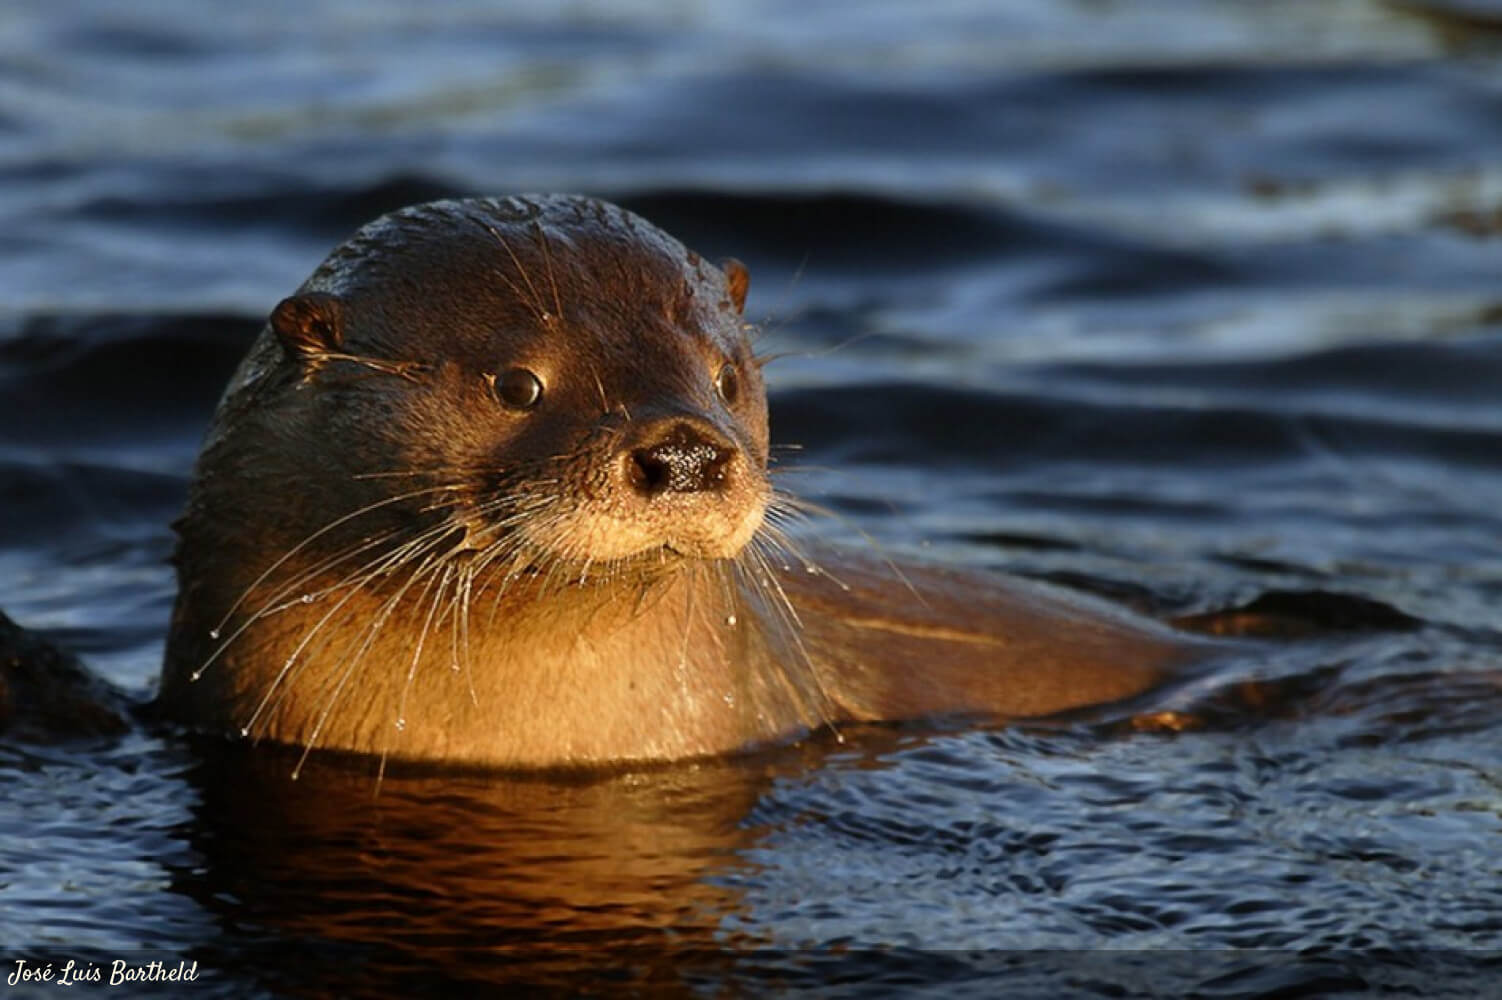 A Southern river otter with its head above water.